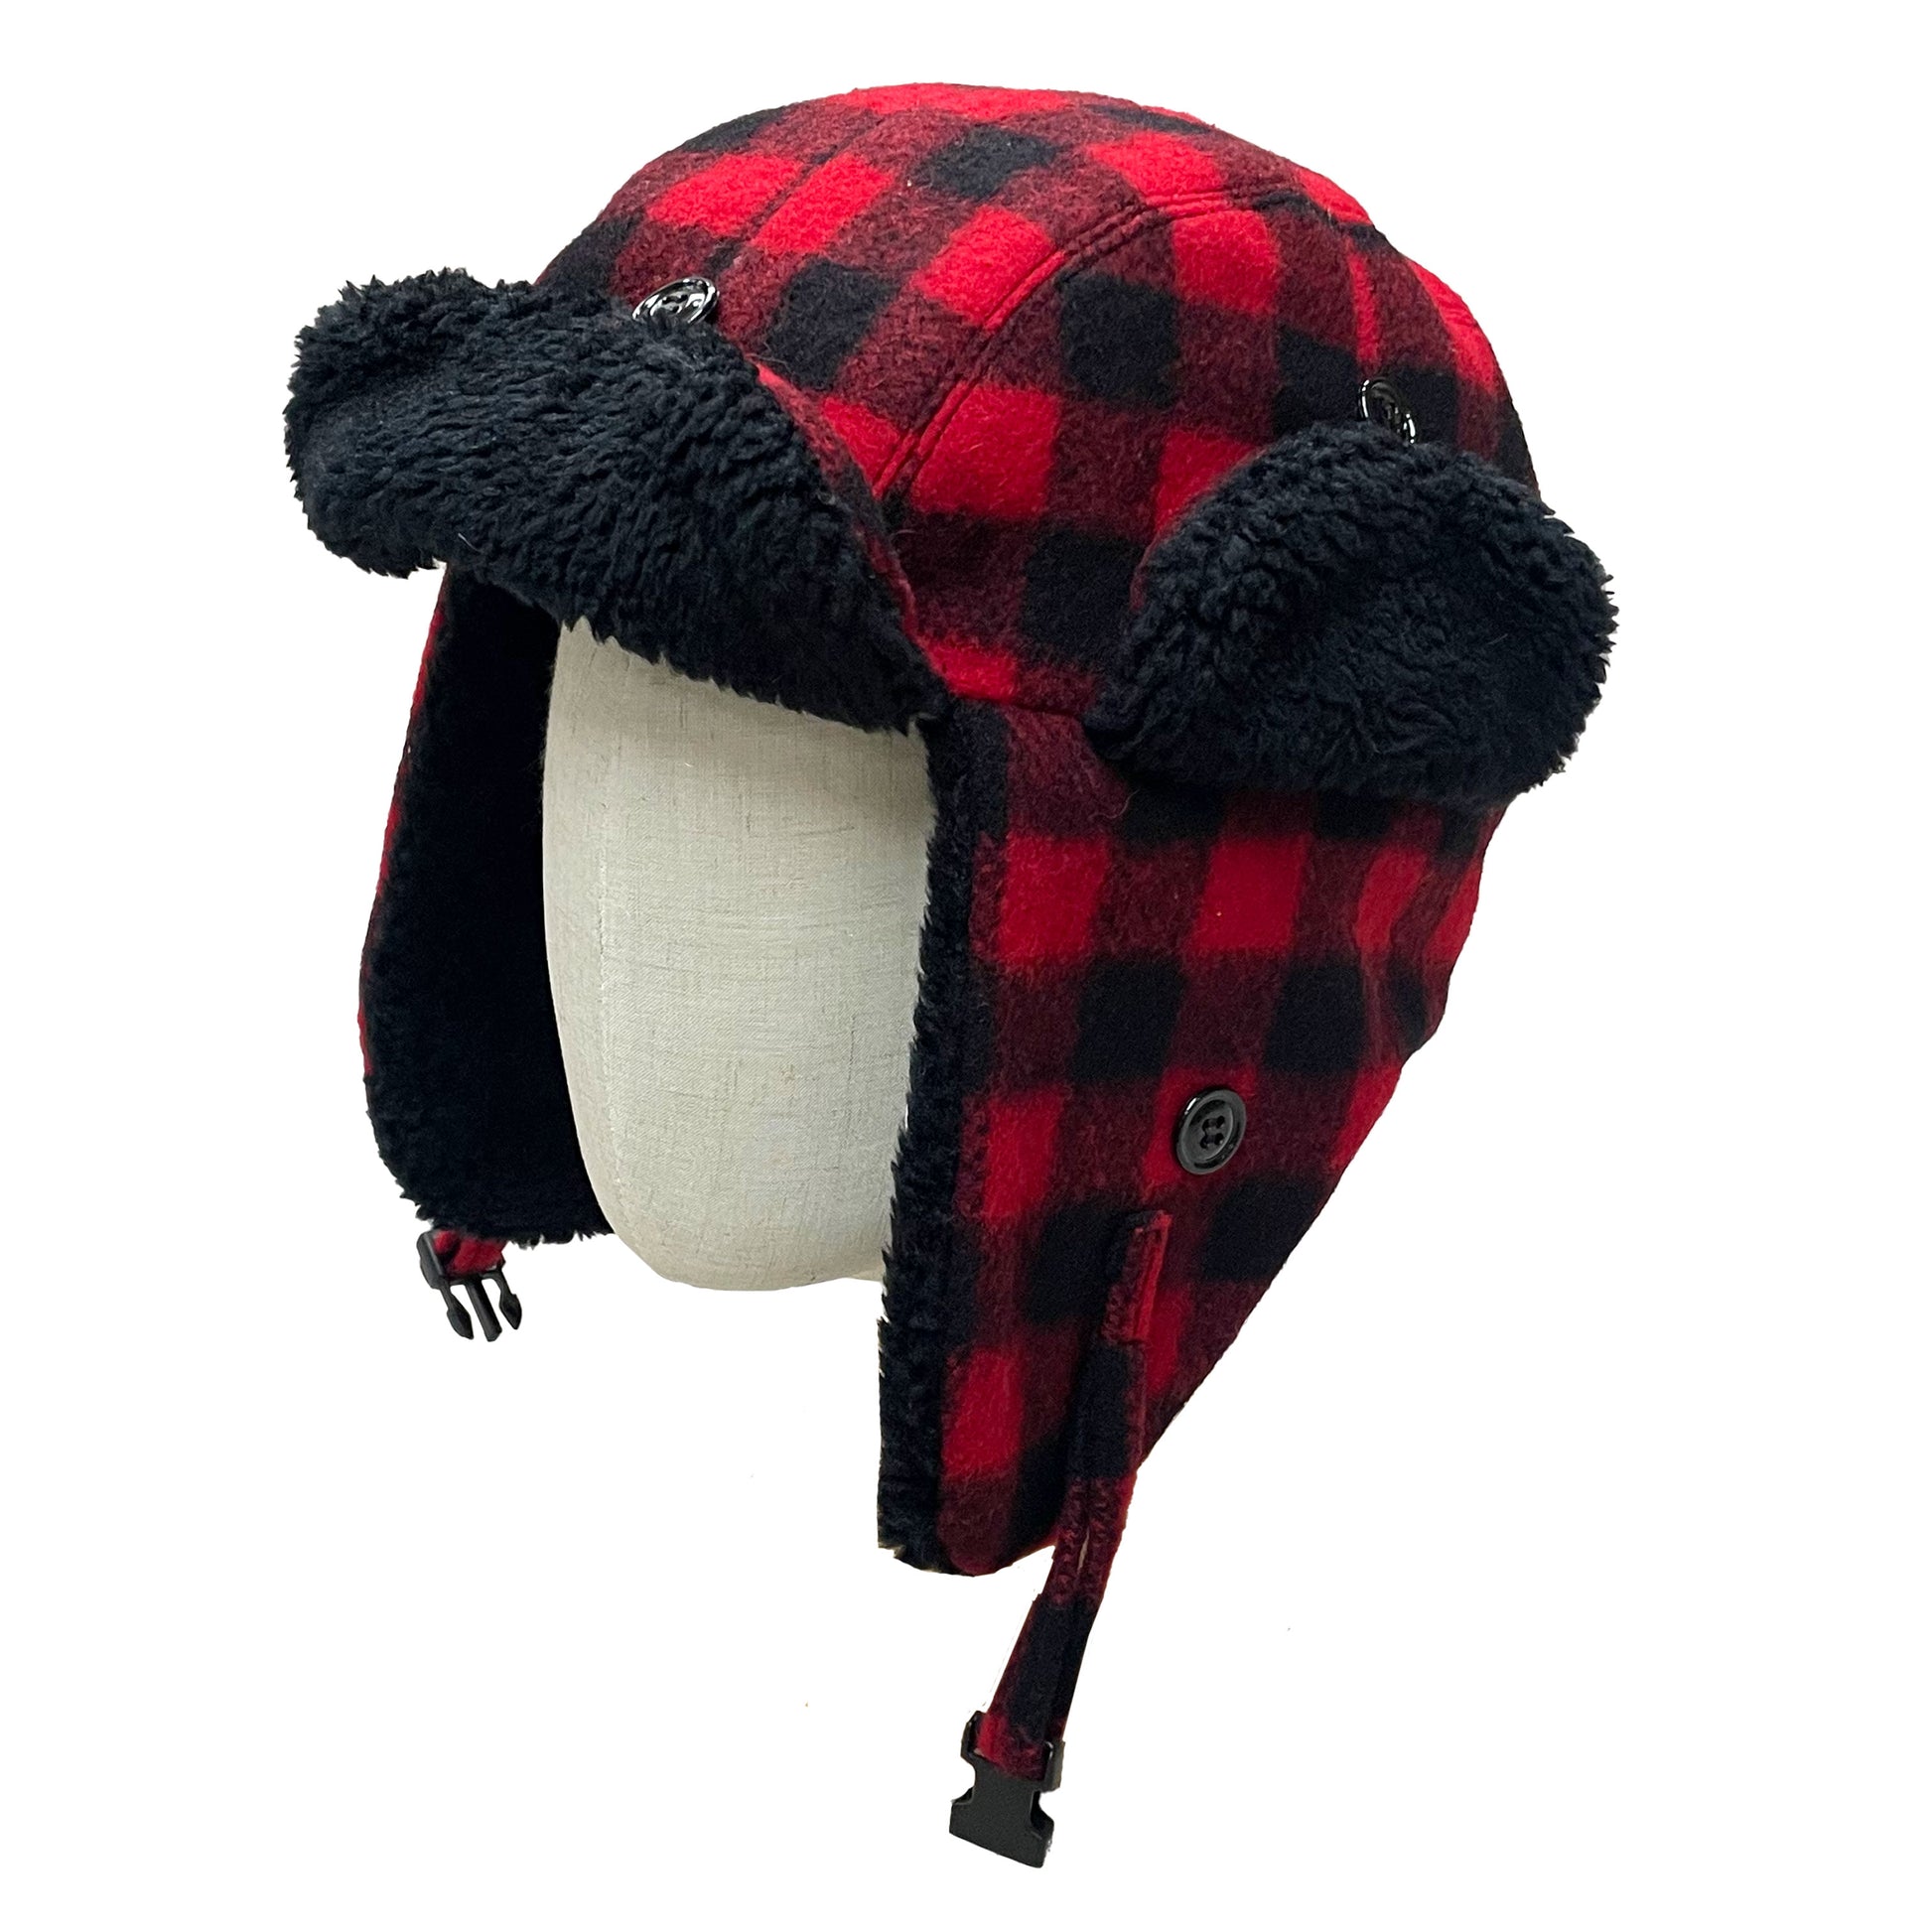 Red and black buffalo plaid wool bomber style hat with black sherpa fleece lining around rim and visor. Side view